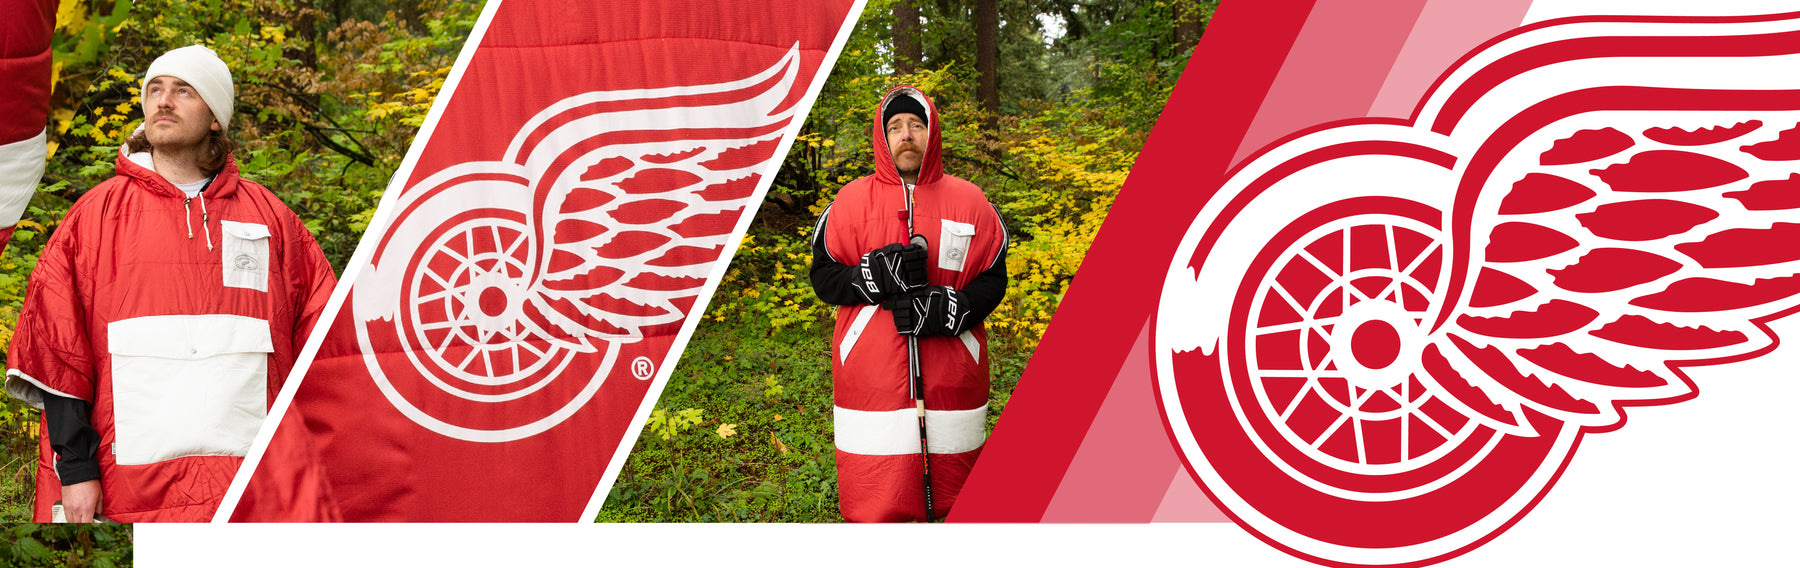 Detroit Red Wings X Poler Poncho